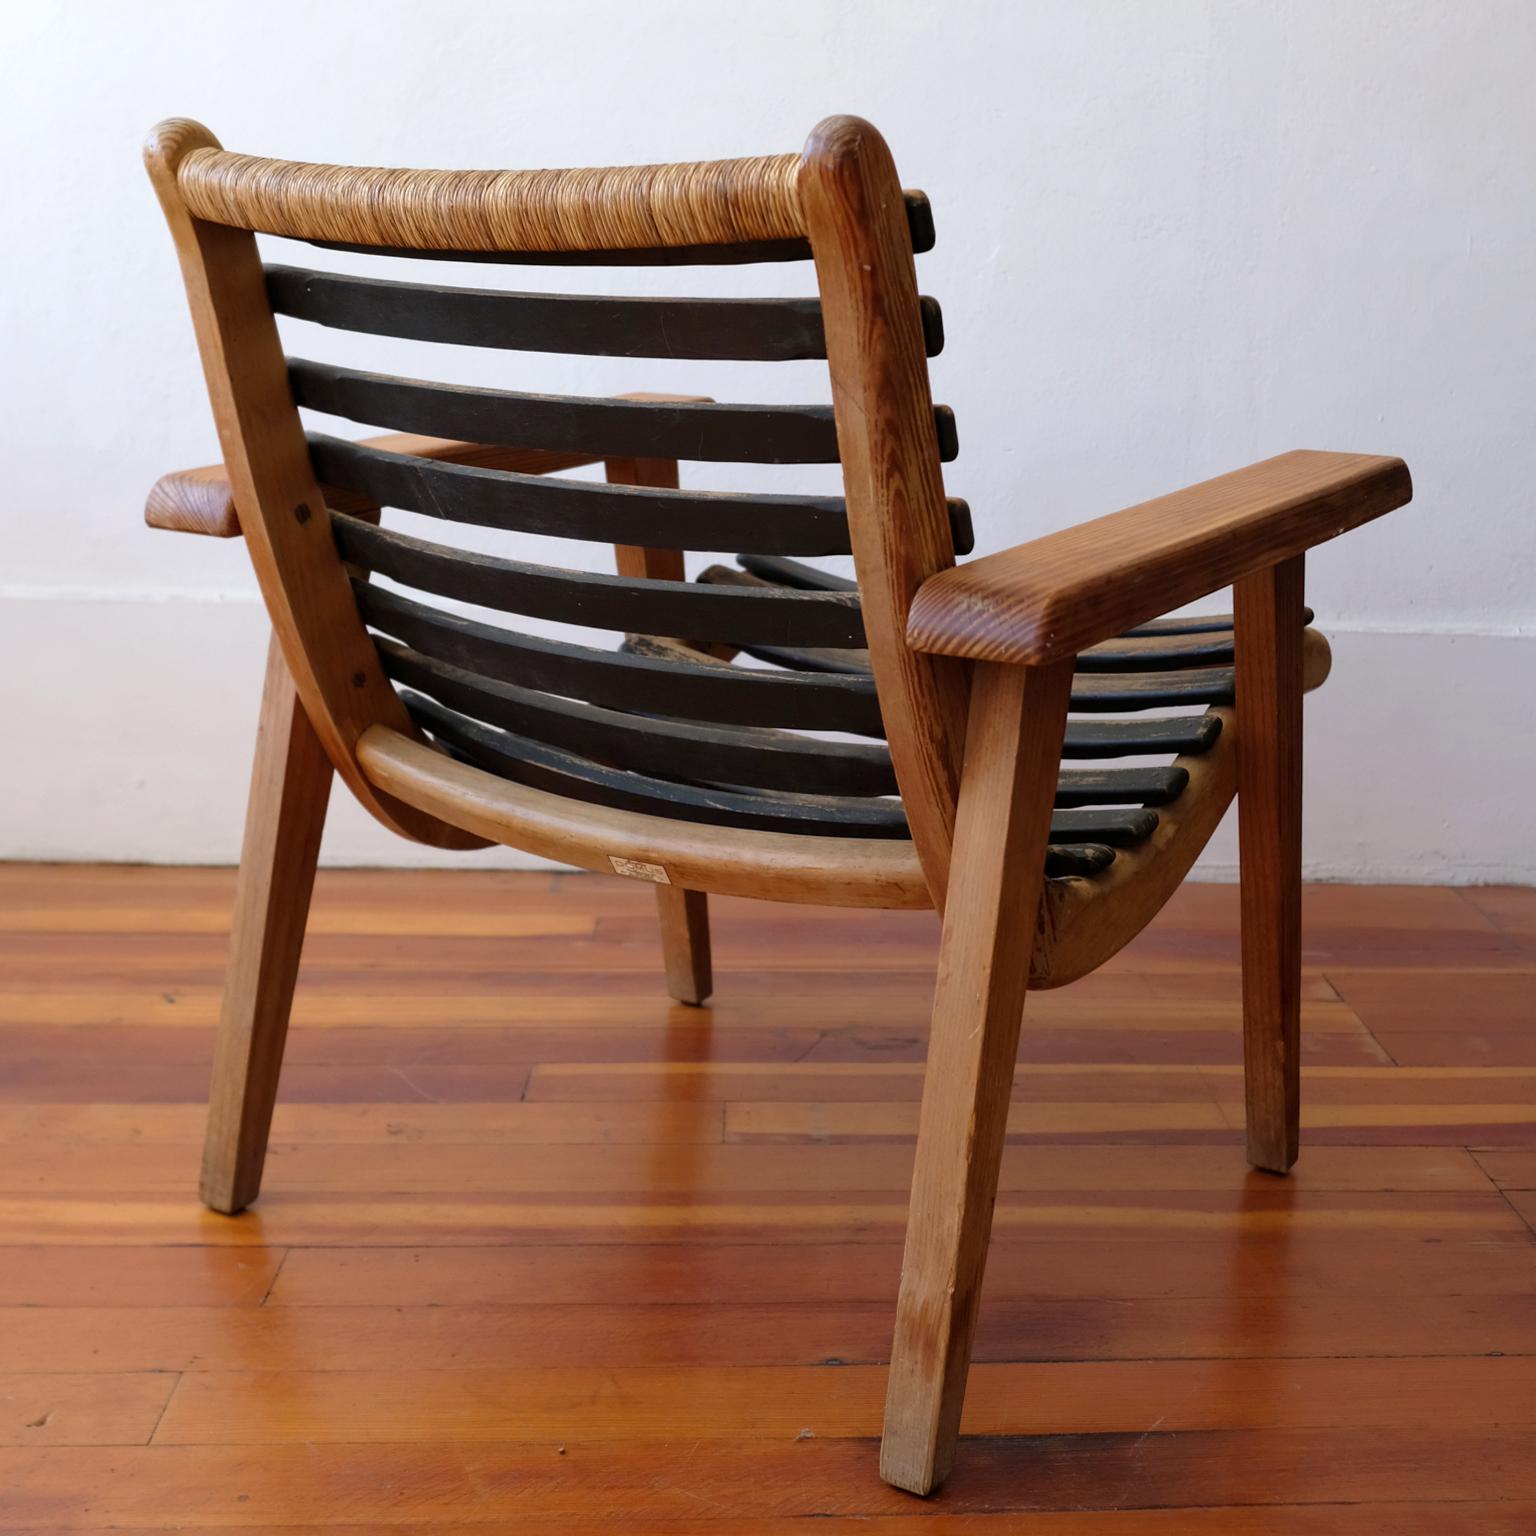 Mid-20th Century Mexican Bauhaus Chair by Michael van Beuren for Domus